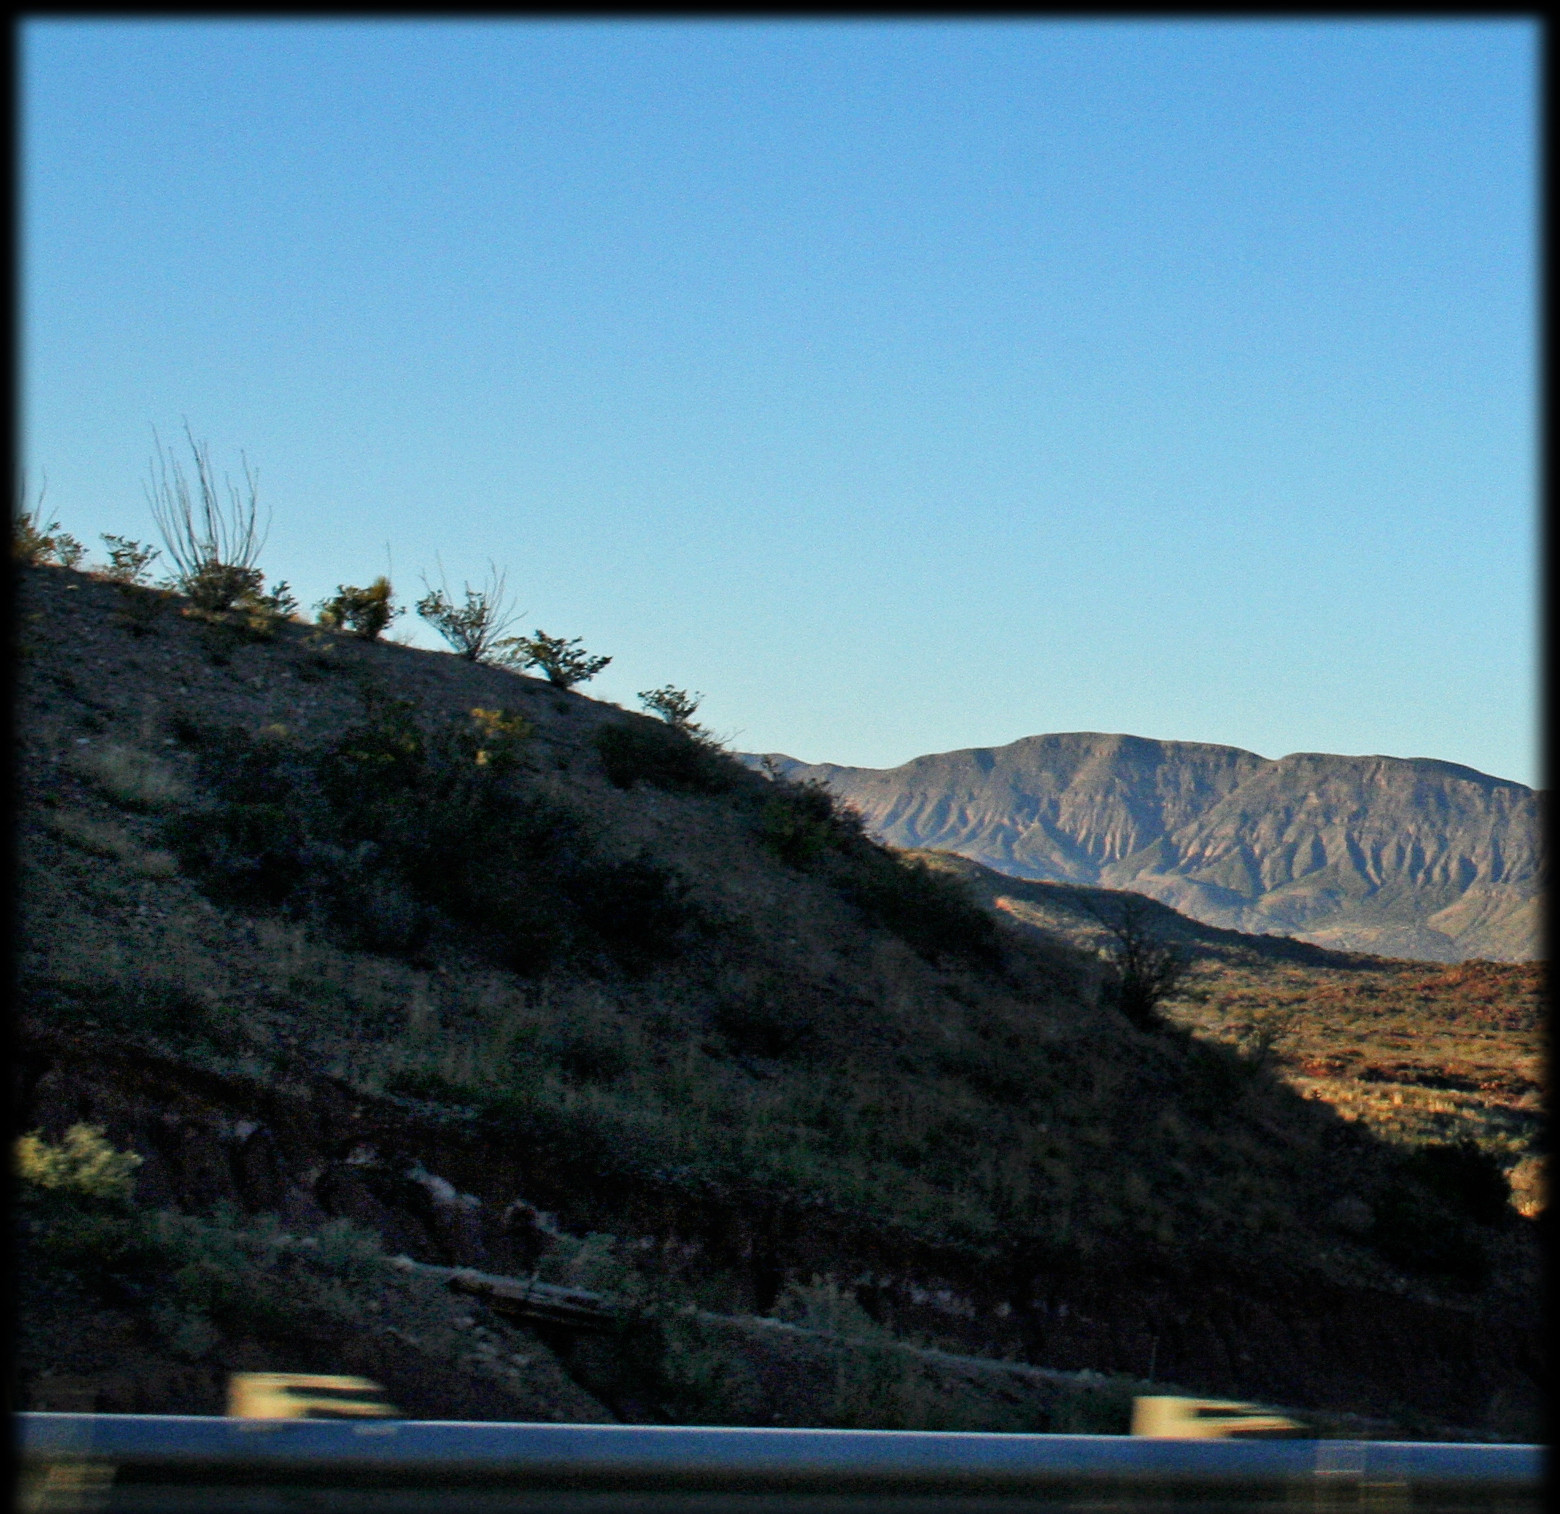 Views from the Road, New Mexico, 2006